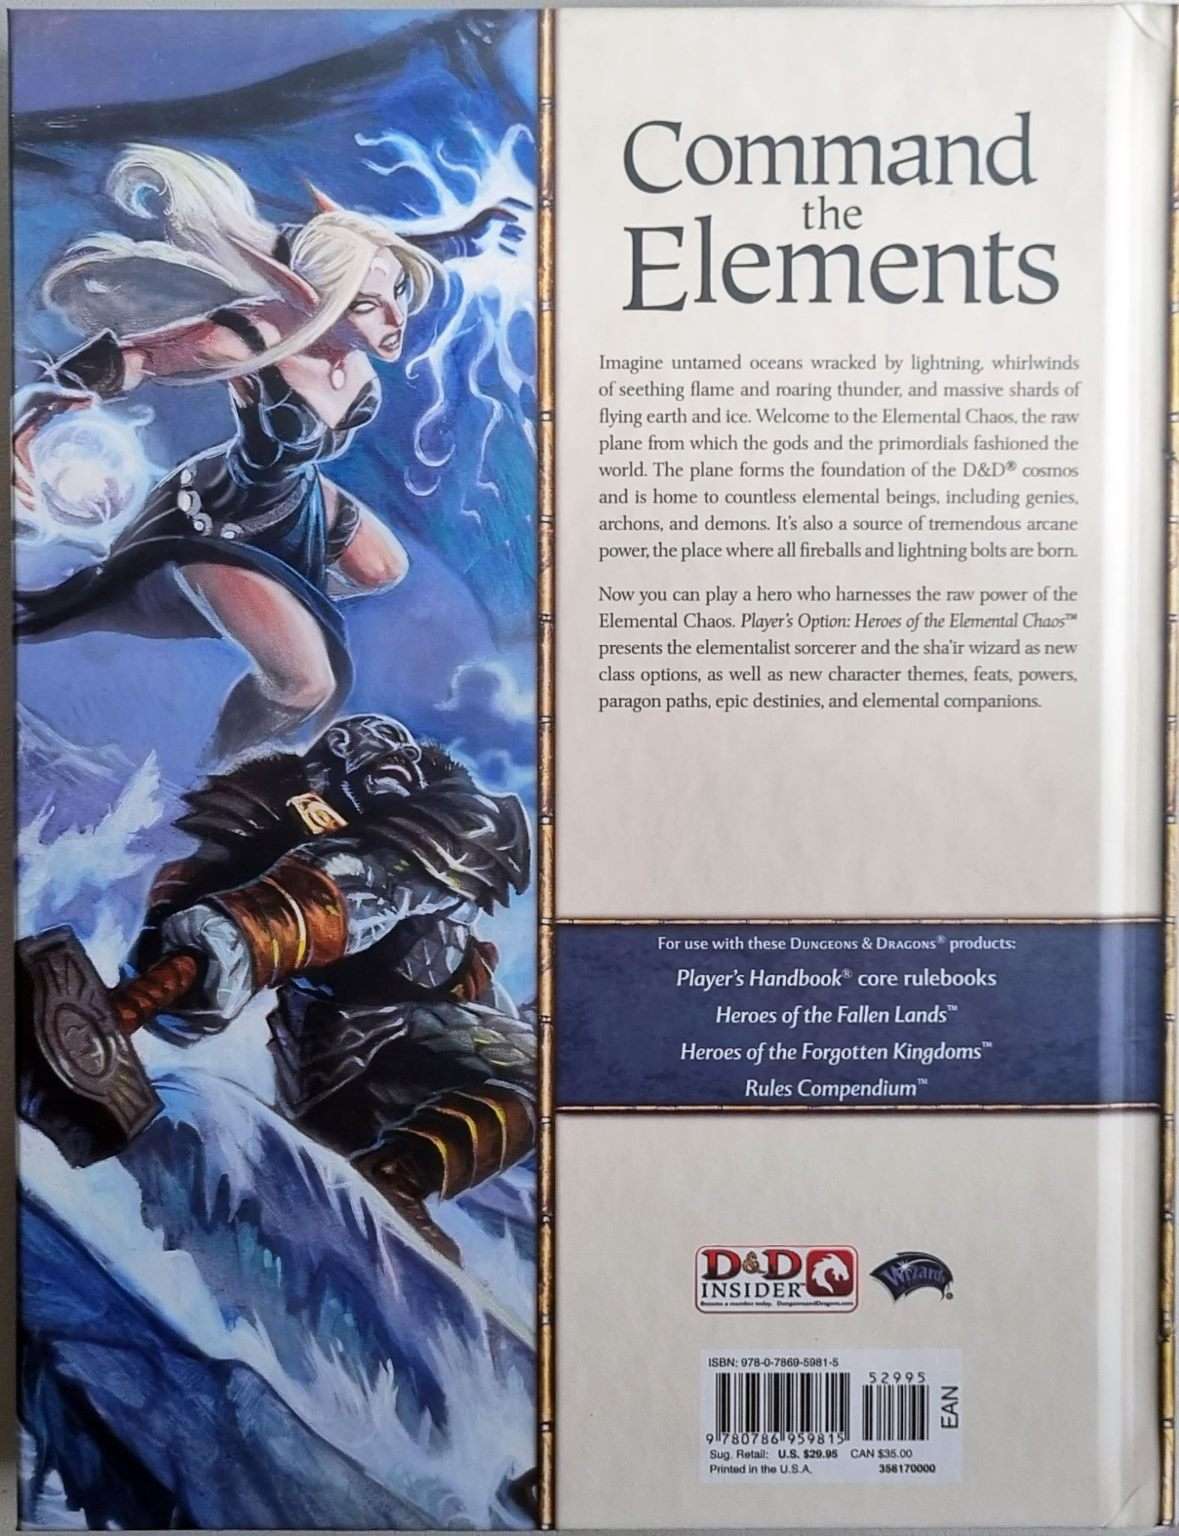 Dungeons and Dragons - Heroes of the Elemental Chaos (4e) Default Title